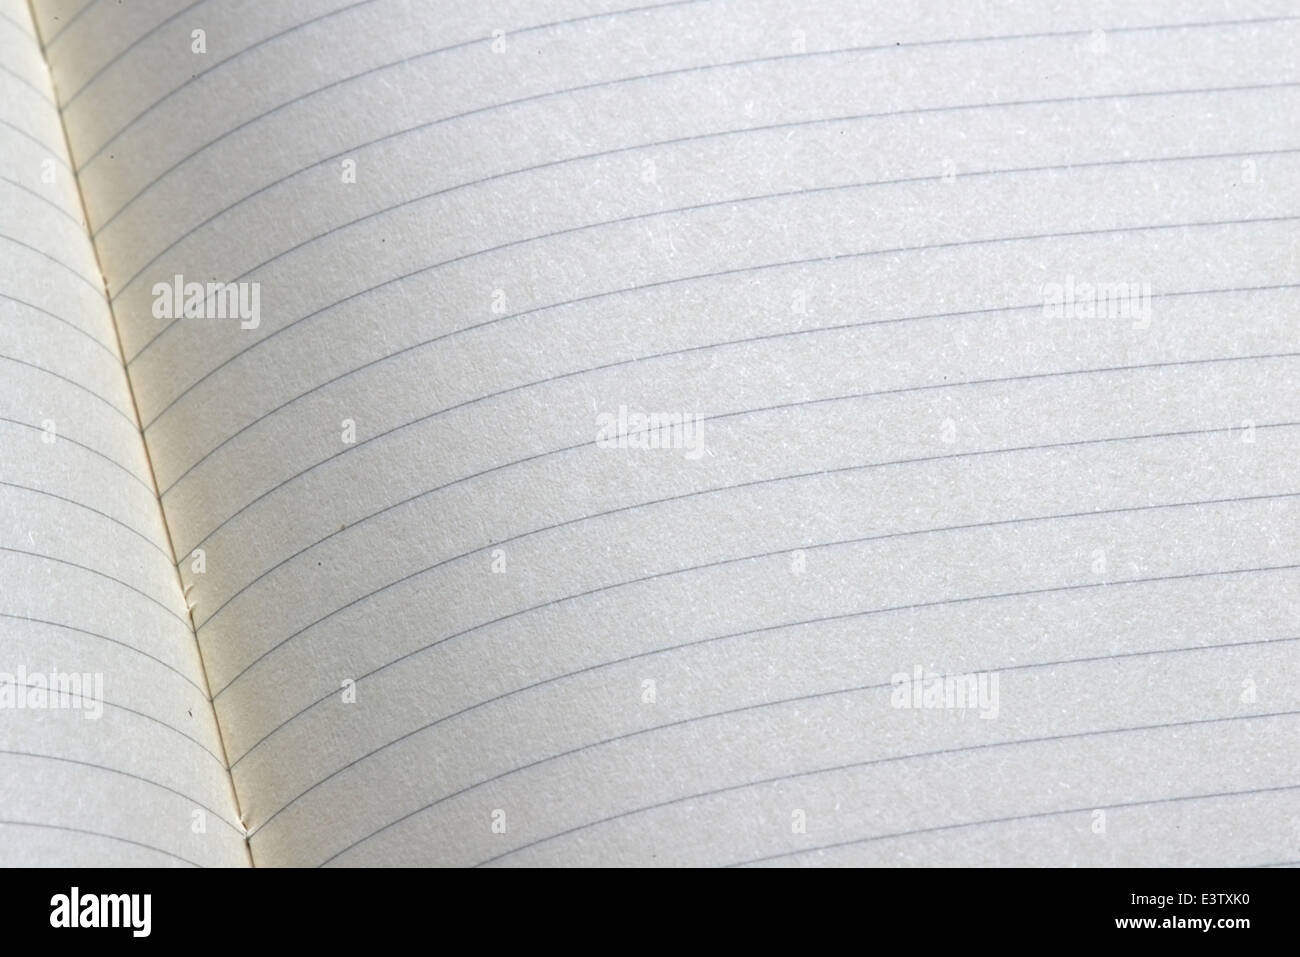 Blank ruled notebook page Stock Photo